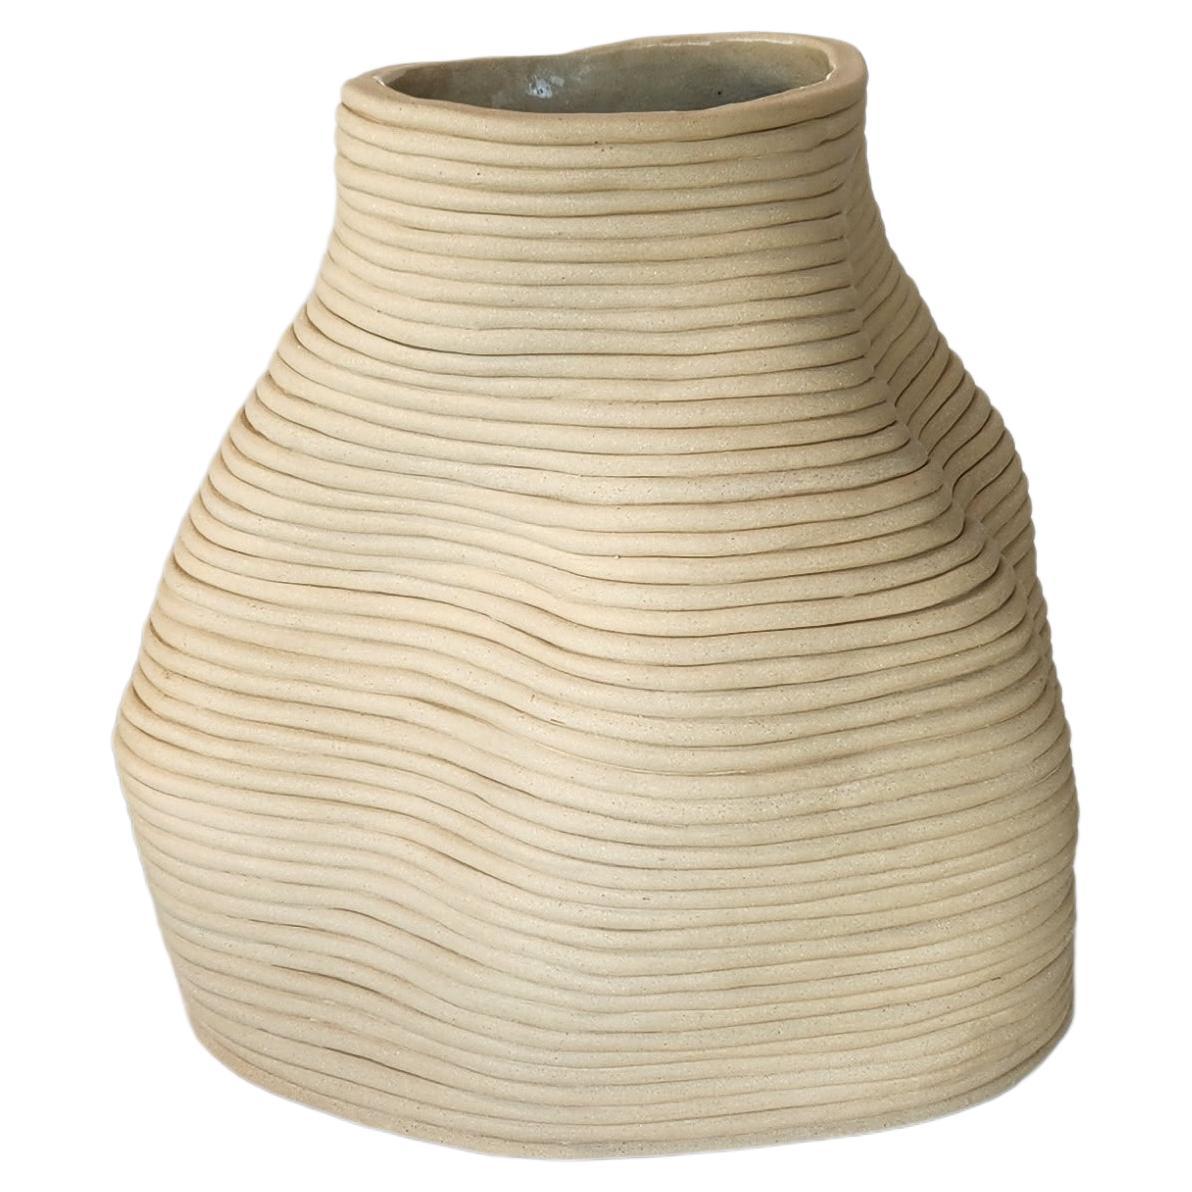 Vase Sculpture Handcrafted Tupiniquim Offwhite 24 For Sale